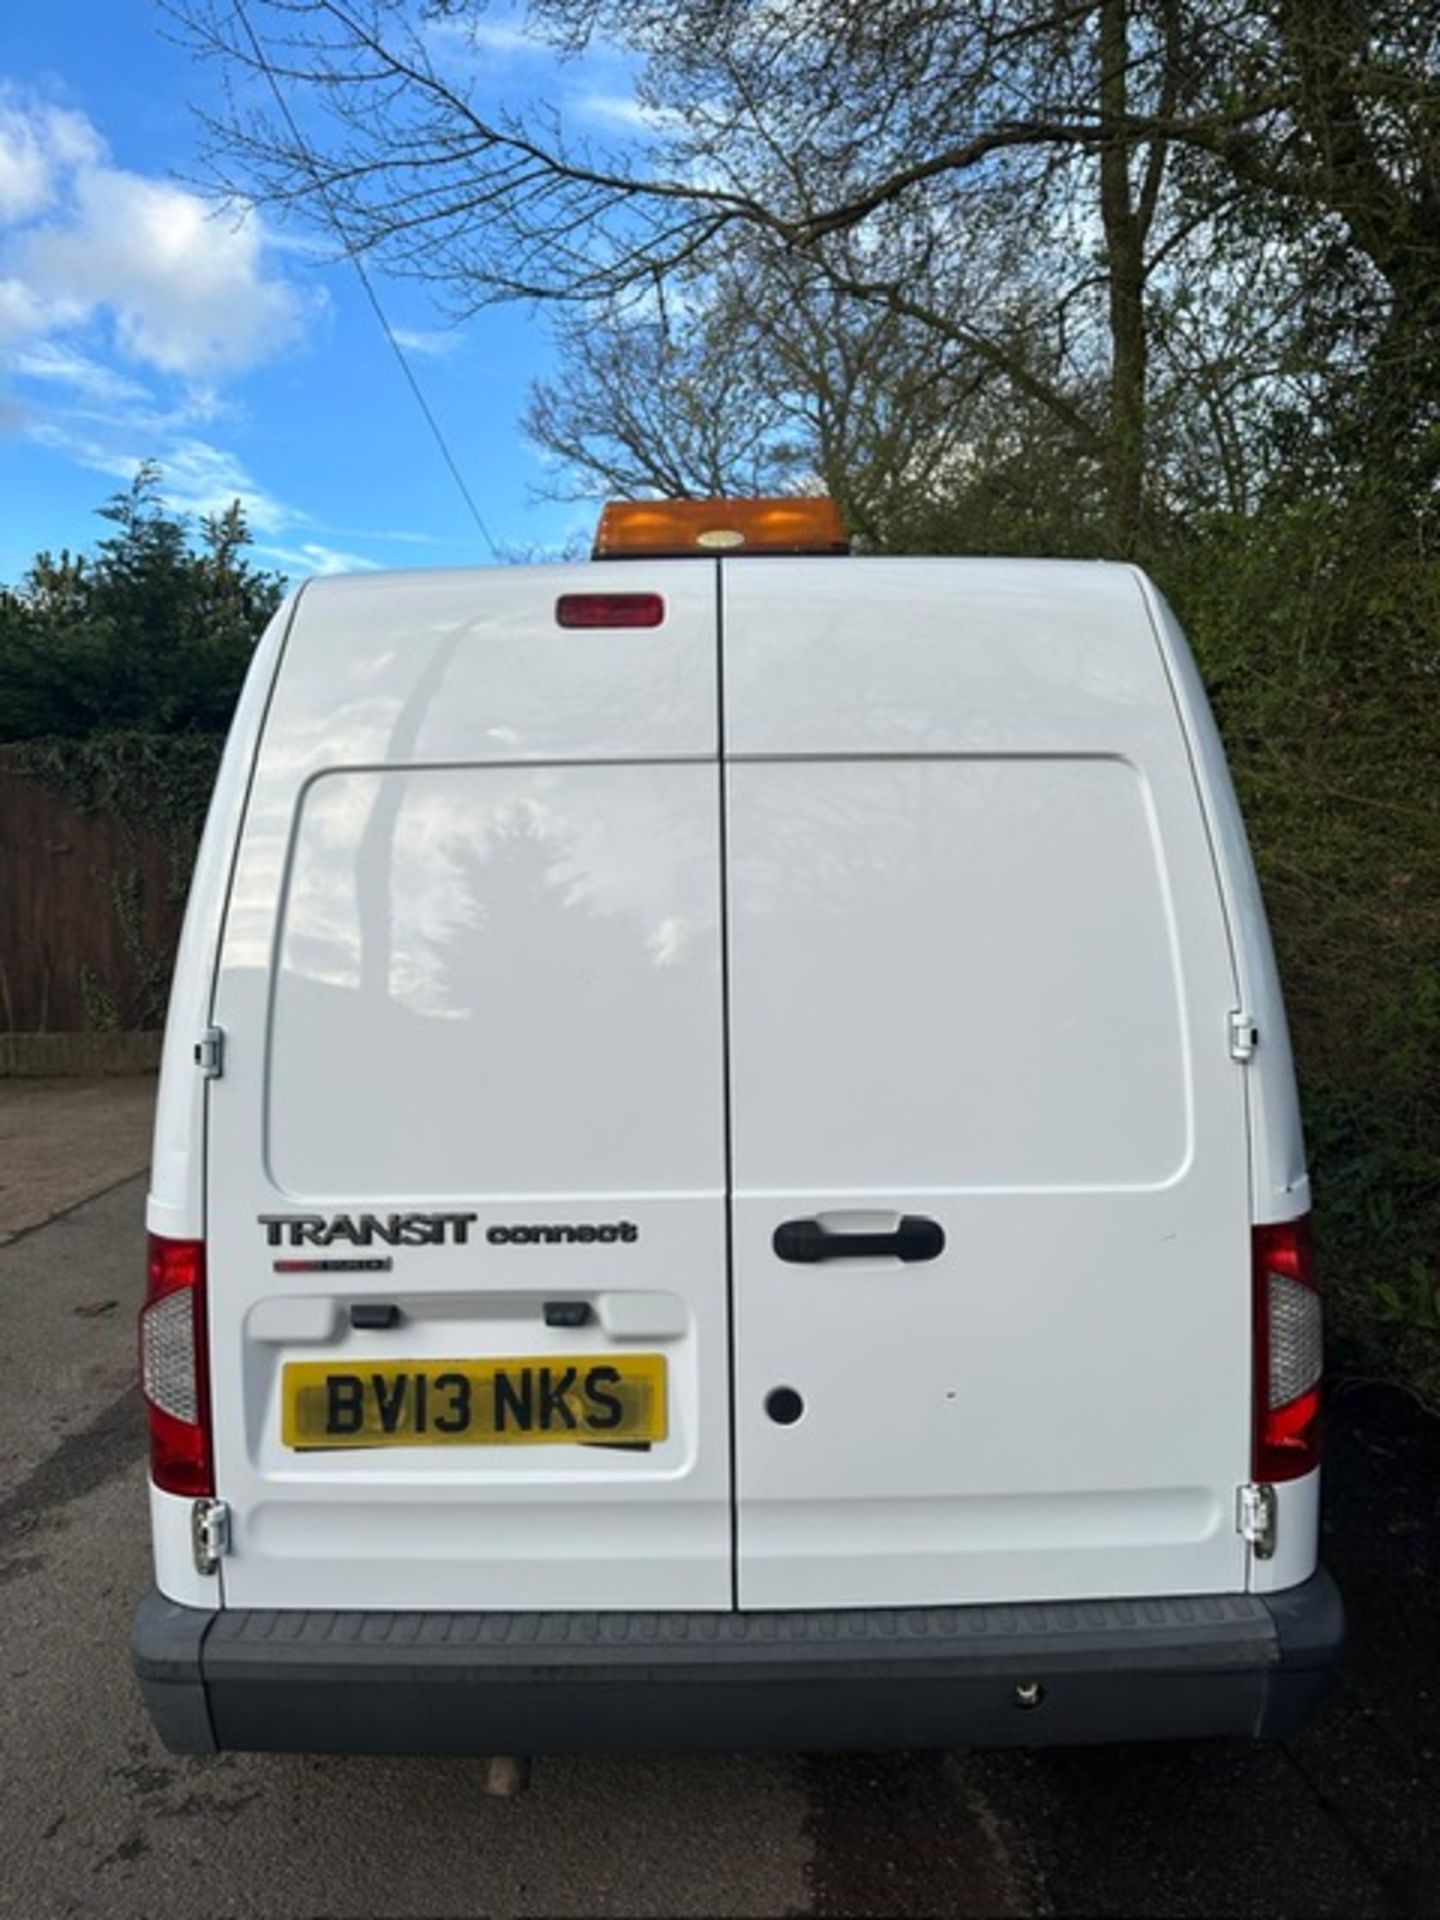 FORD TRANSIT CONNECT PANEL VAN REG:BV13 NKS 1.8LITRE. HIGH ROOF LWB. 83K REC MILES APPROX. WITH V5 A - Image 6 of 26